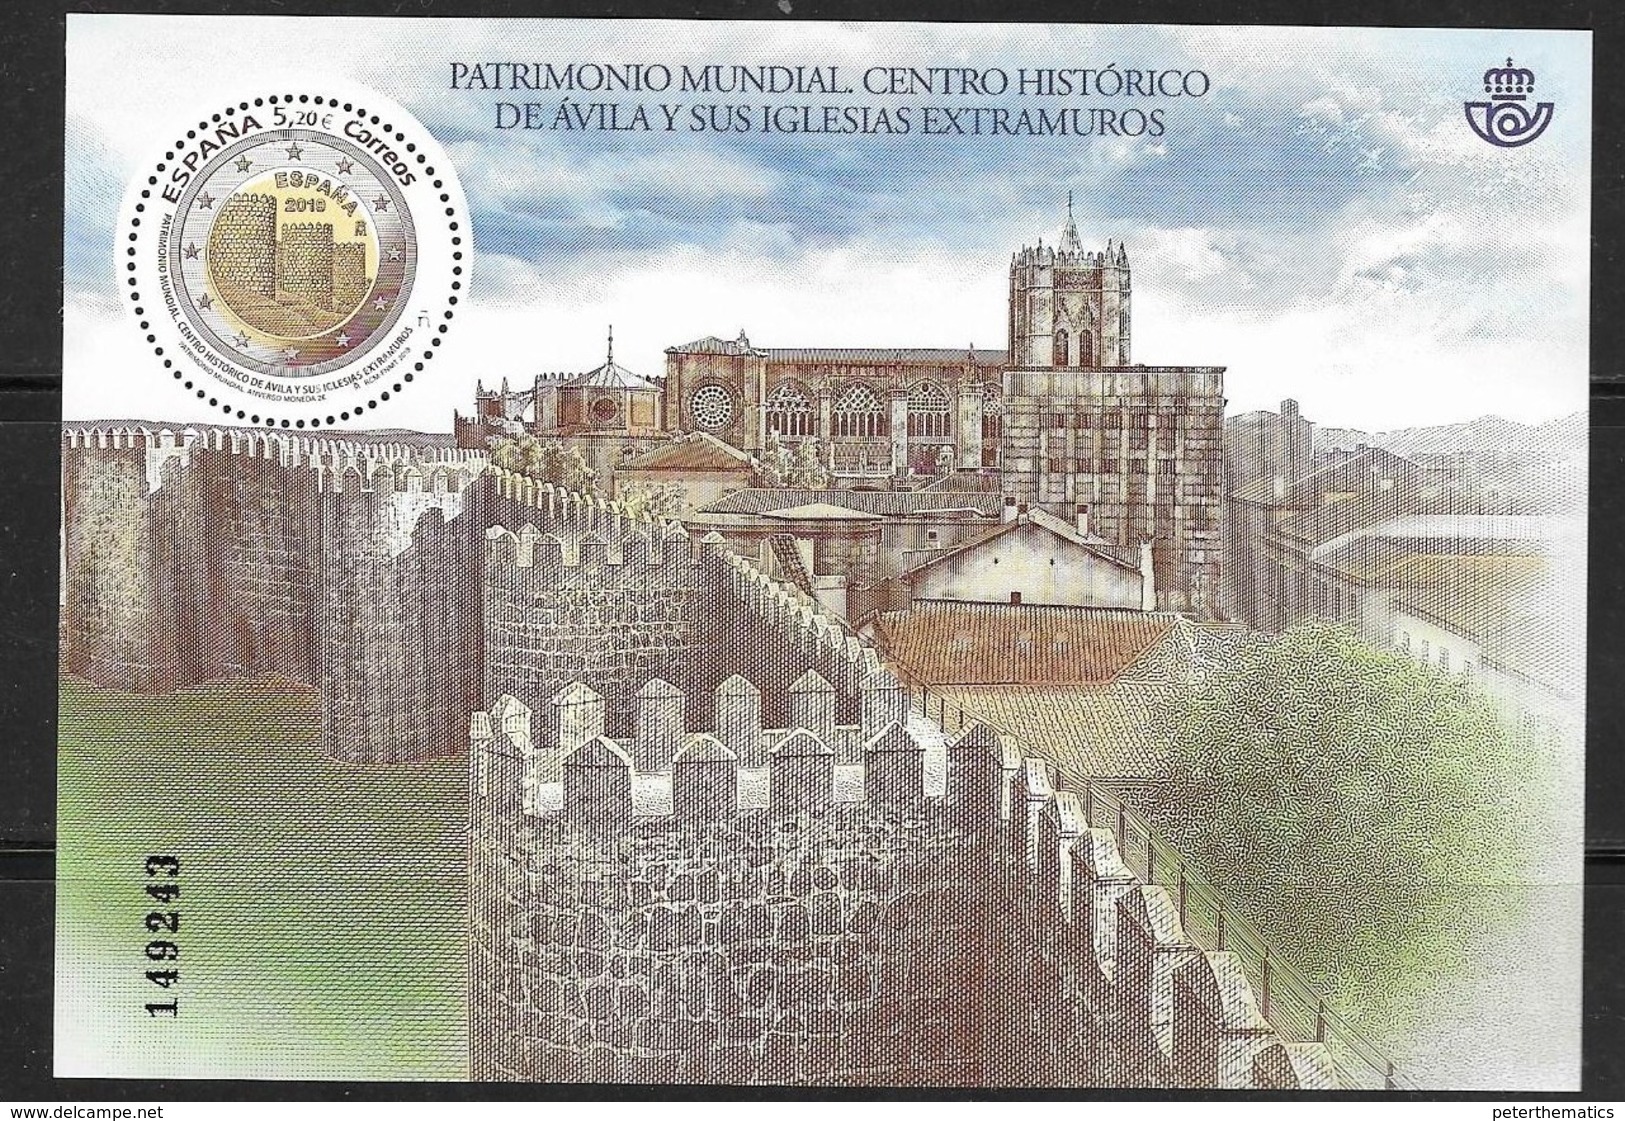 SPAIN, 2019, MNH, WORLD HERITAGE, AVILA, CHURCHES, SPECIAL S/SHEET - Churches & Cathedrals